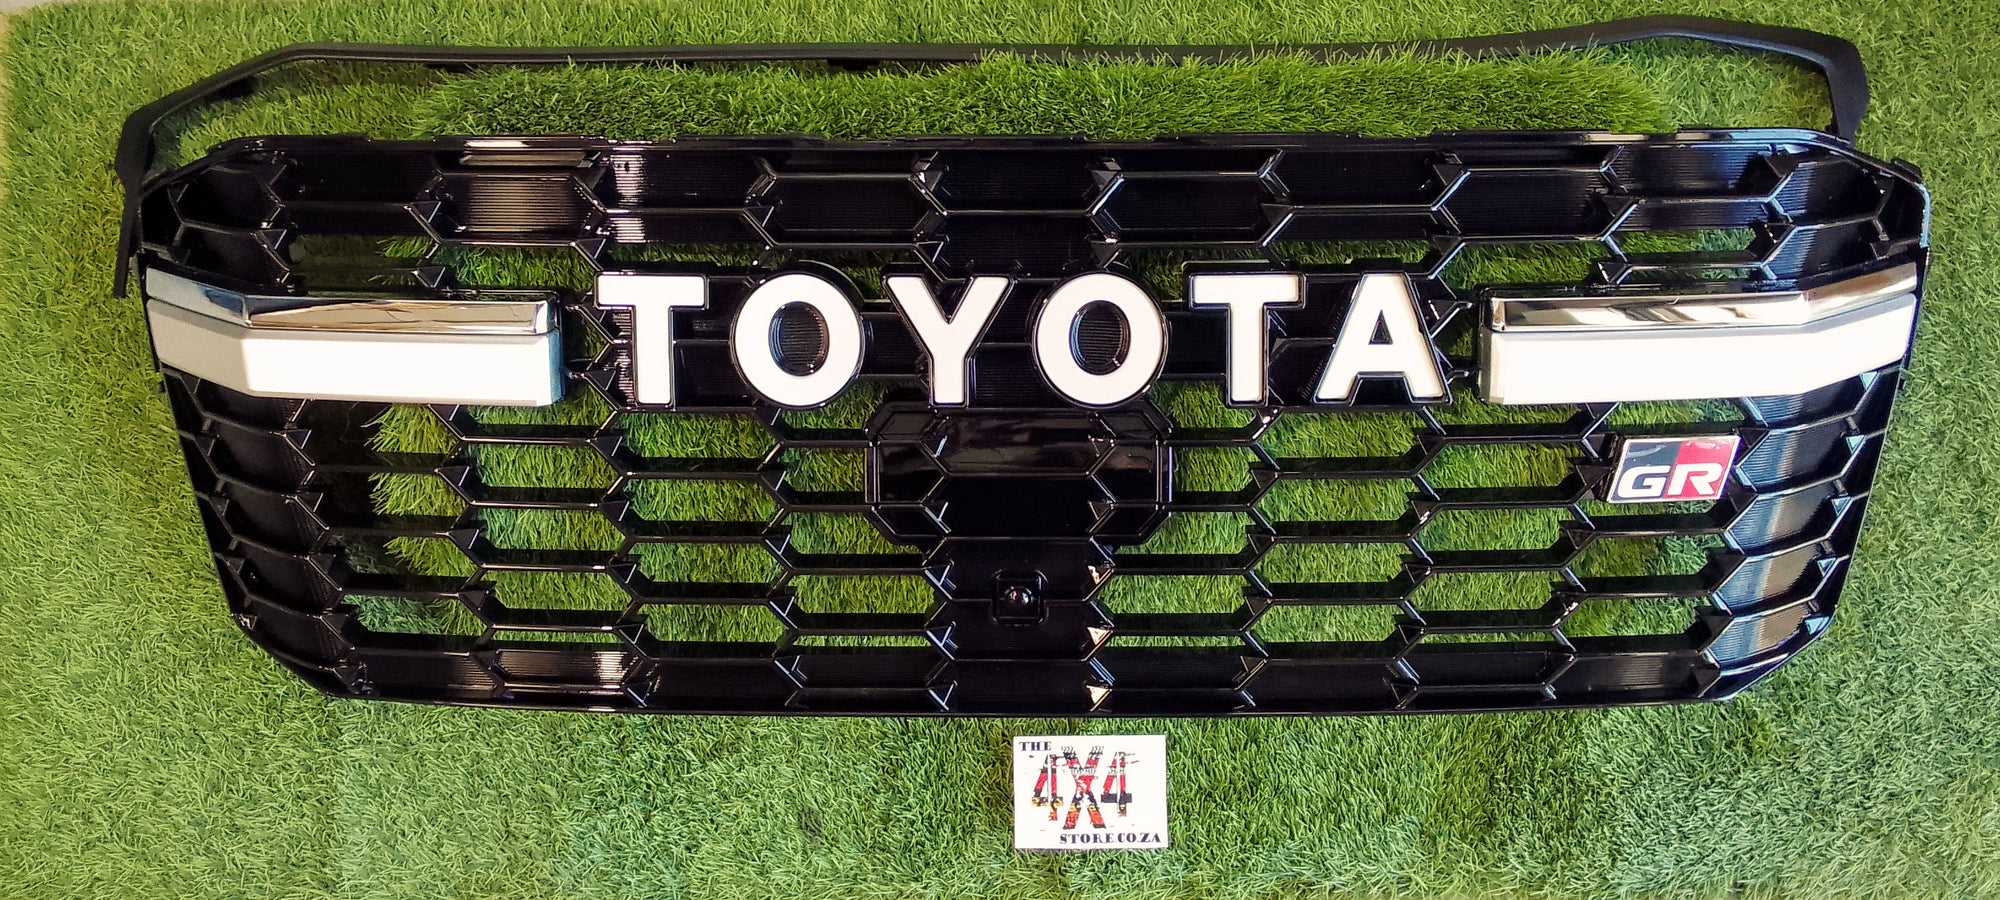 Toyota Land Cruiser 300 facelift Grill